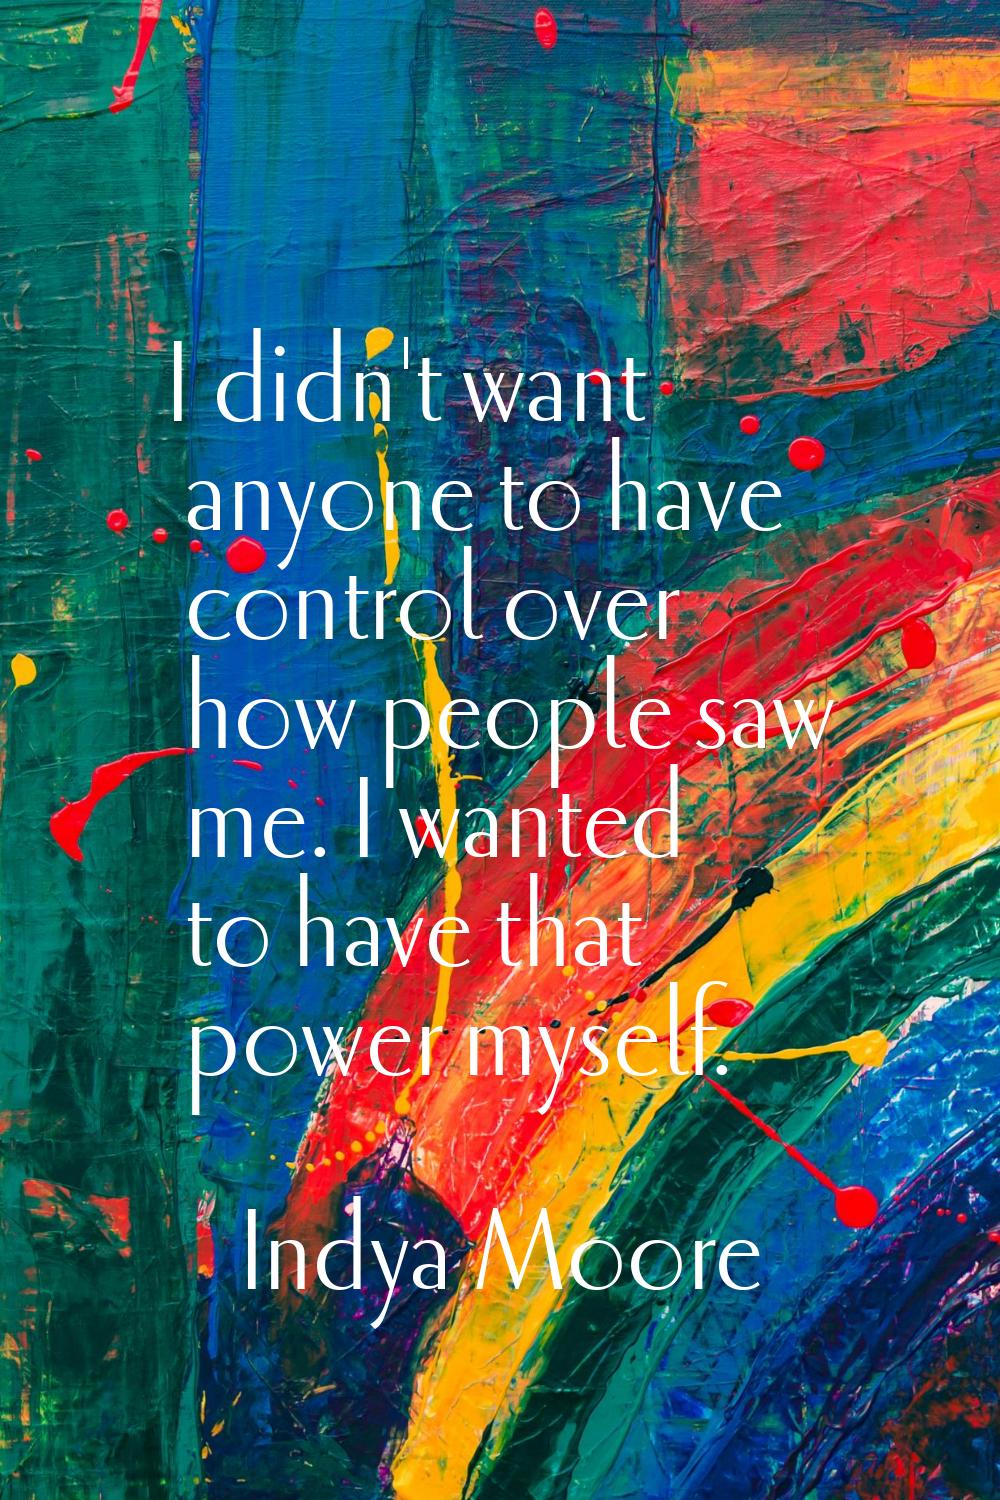 I didn't want anyone to have control over how people saw me. I wanted to have that power myself.